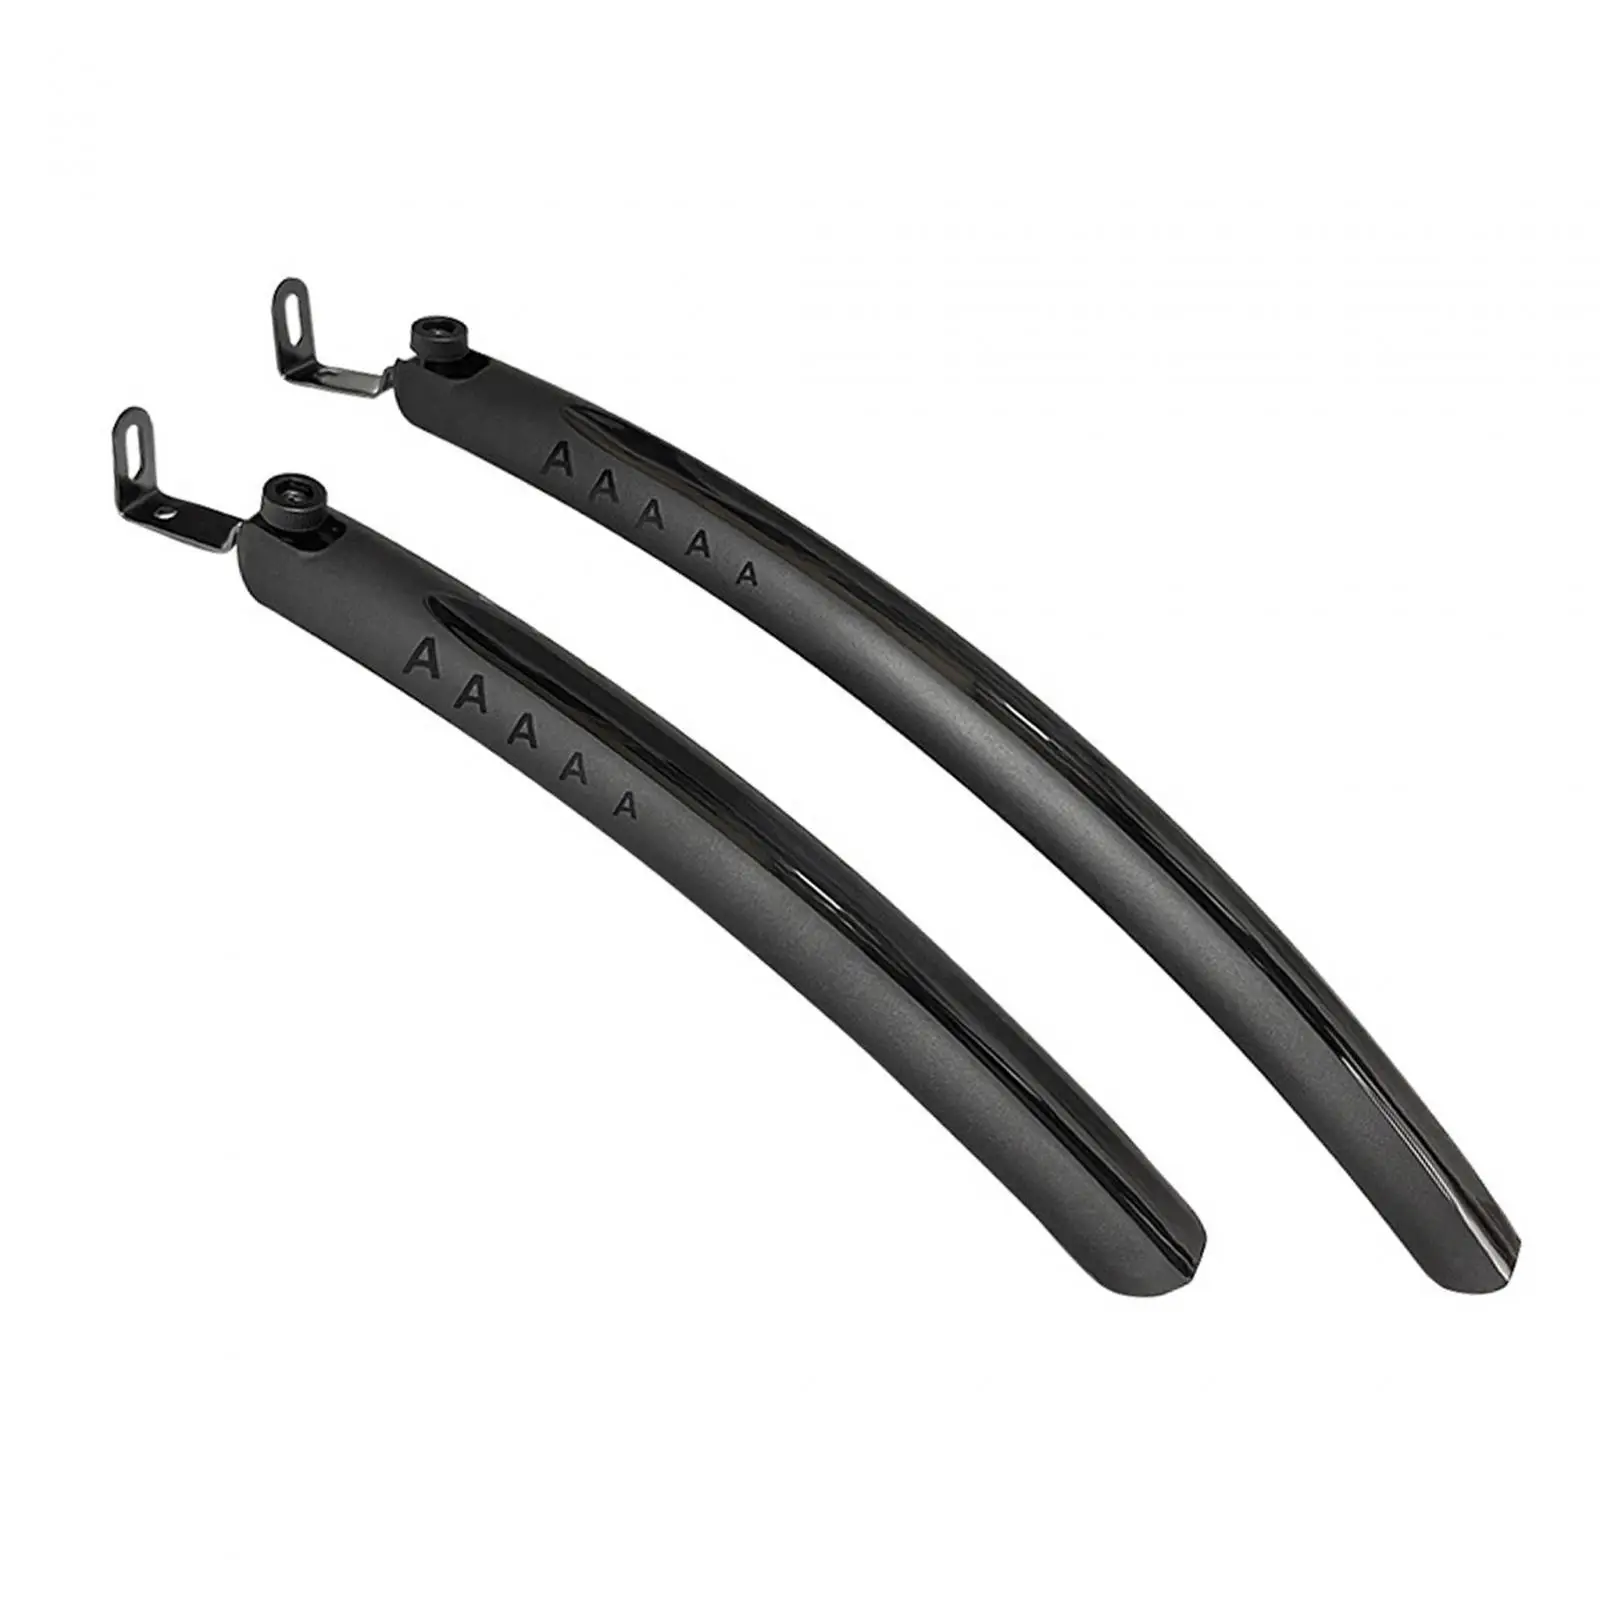 Bike Fenders Front and Rear Mud Guard Mudguards for 26 28inch Folding Bike